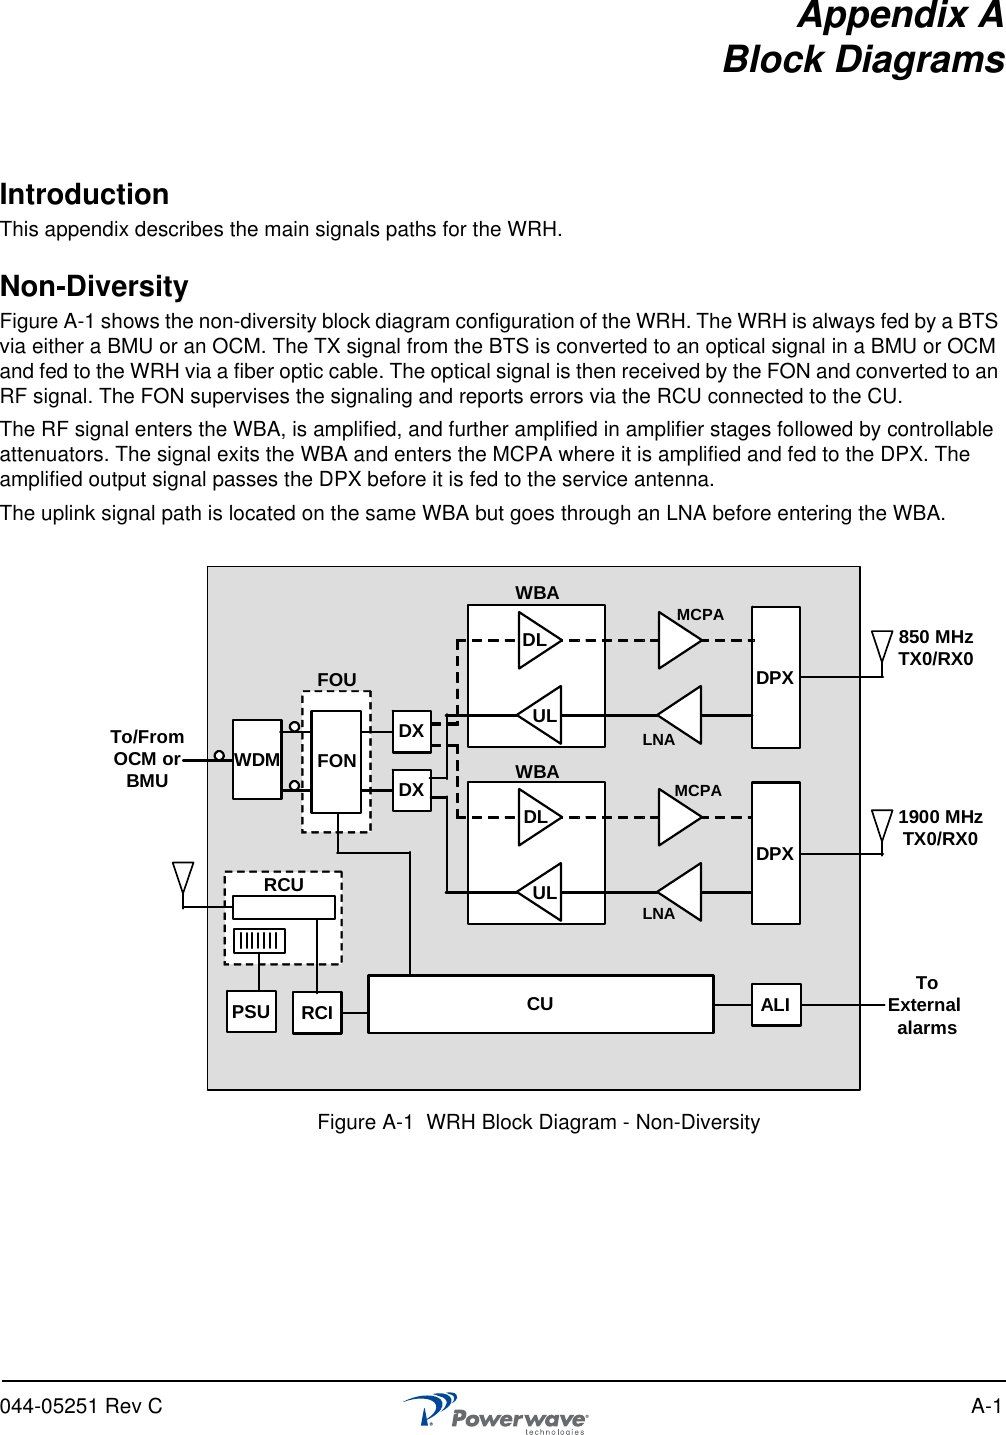 044-05251 Rev C A-1Appendix ABlock DiagramsIntroductionThis appendix describes the main signals paths for the WRH.Non-DiversityFigure A-1 shows the non-diversity block diagram configuration of the WRH. The WRH is always fed by a BTS via either a BMU or an OCM. The TX signal from the BTS is converted to an optical signal in a BMU or OCM and fed to the WRH via a fiber optic cable. The optical signal is then received by the FON and converted to an RF signal. The FON supervises the signaling and reports errors via the RCU connected to the CU.The RF signal enters the WBA, is amplified, and further amplified in amplifier stages followed by controllable attenuators. The signal exits the WBA and enters the MCPA where it is amplified and fed to the DPX. The amplified output signal passes the DPX before it is fed to the service antenna.The uplink signal path is located on the same WBA but goes through an LNA before entering the WBA.Figure A-1  WRH Block Diagram - Non-DiversityWDMFOUDXDXDPXDPXWBAWBADLDLULUL LNALNAMCPAMCPATo/FromOCM orBMURCURCIPSU CUFONALI ToExternal alarms850 MHzTX0/RX01900 MHzTX0/RX0